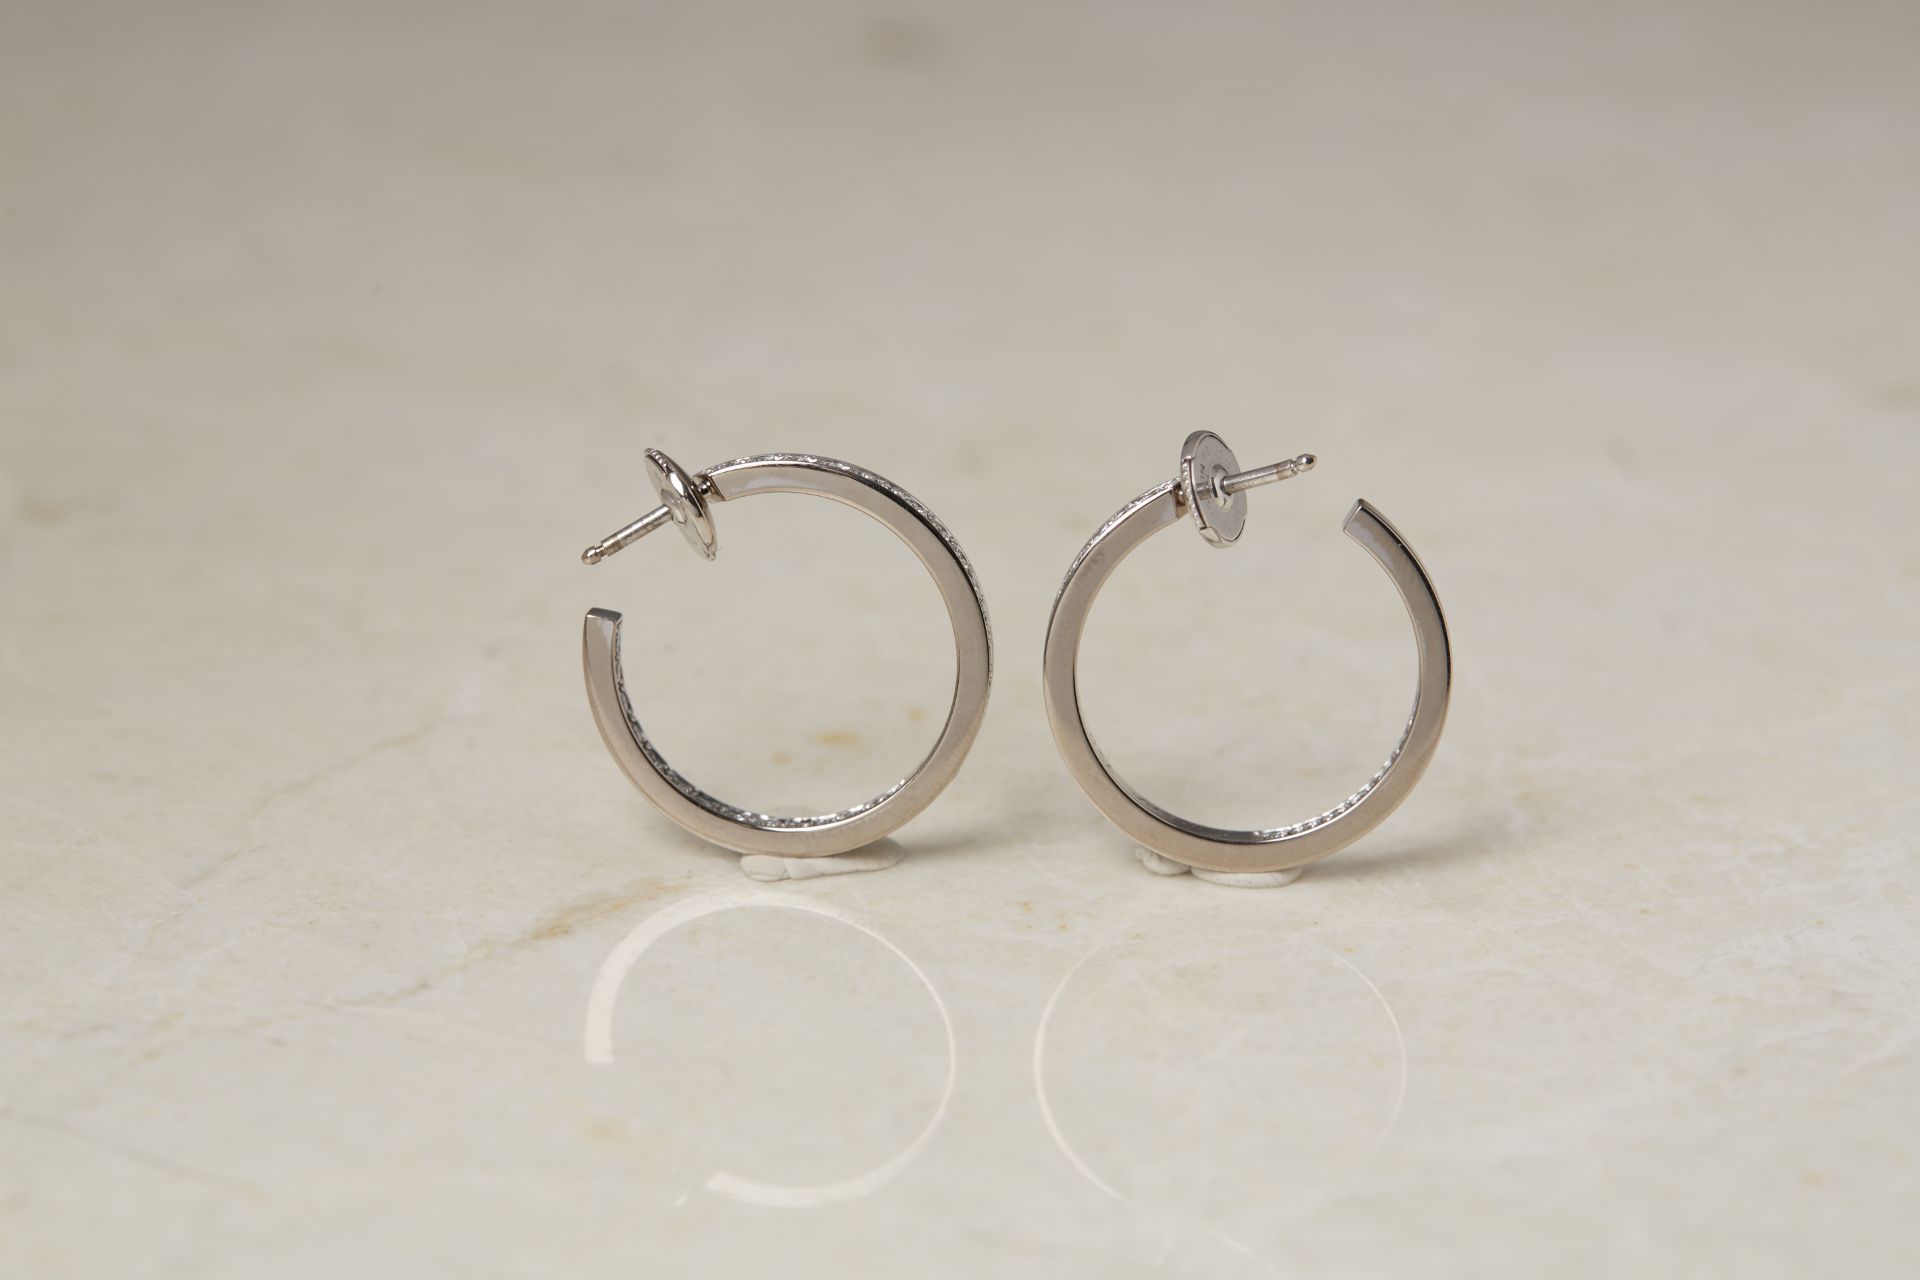 Cartier 18k White Gold 1.20ct Diamond Inside Out Hoop Earrings - Image 9 of 12